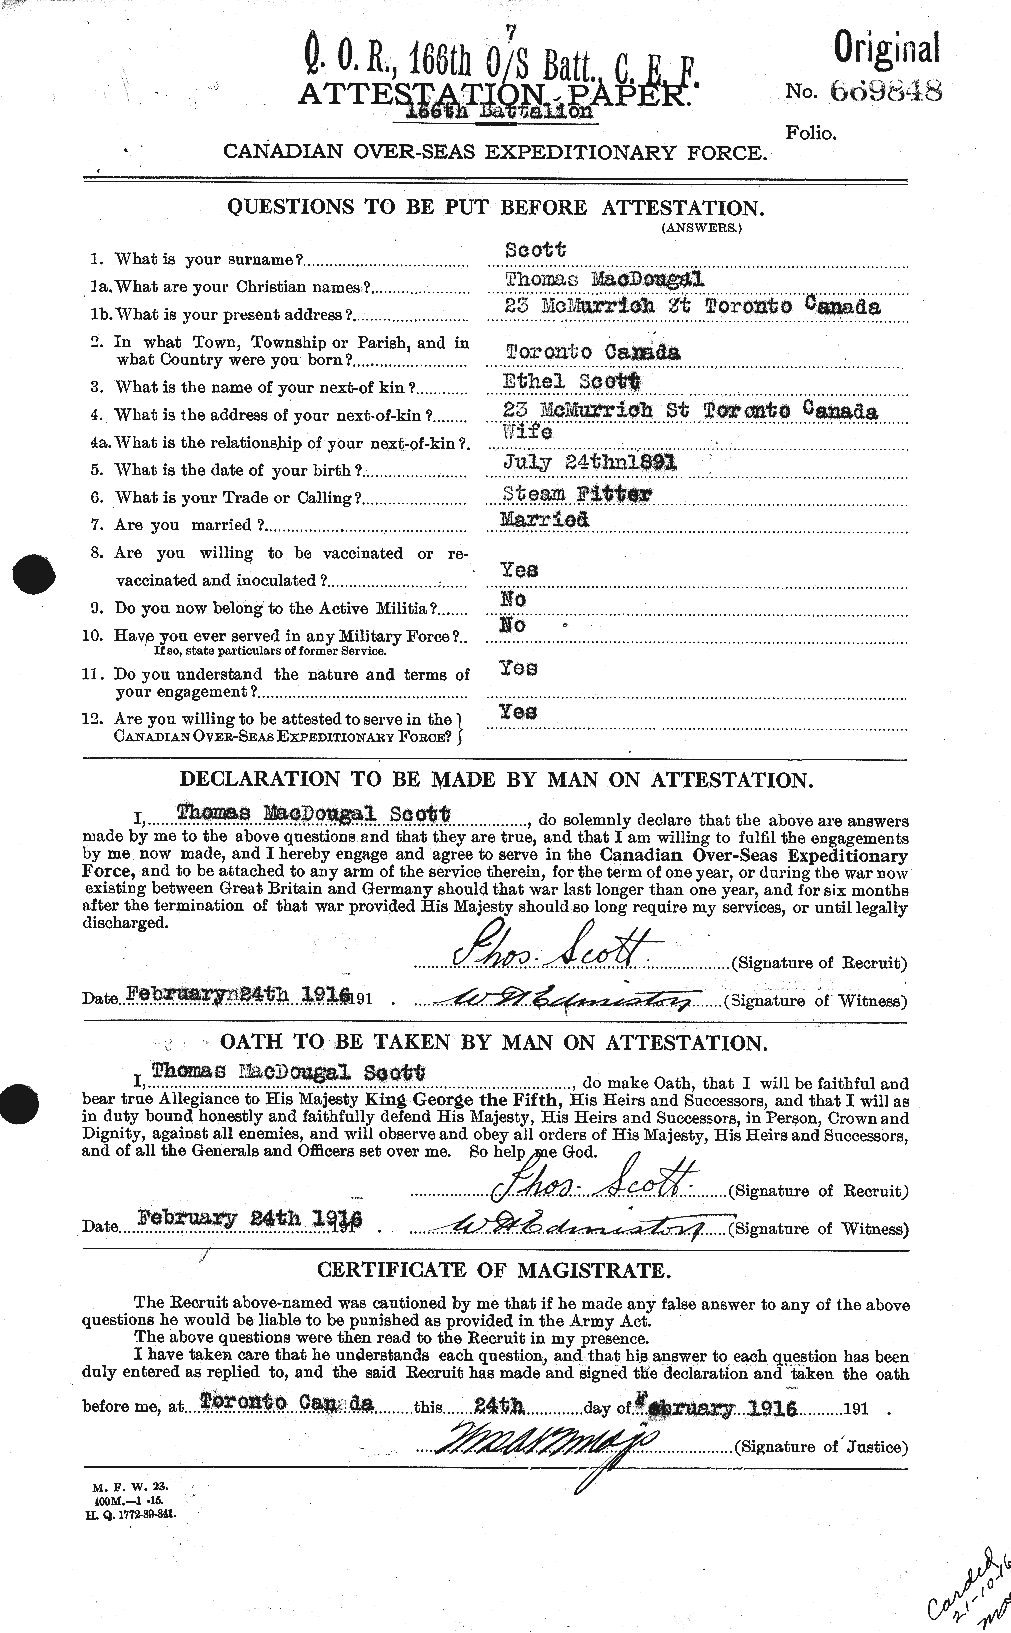 Personnel Records of the First World War - CEF 088230a